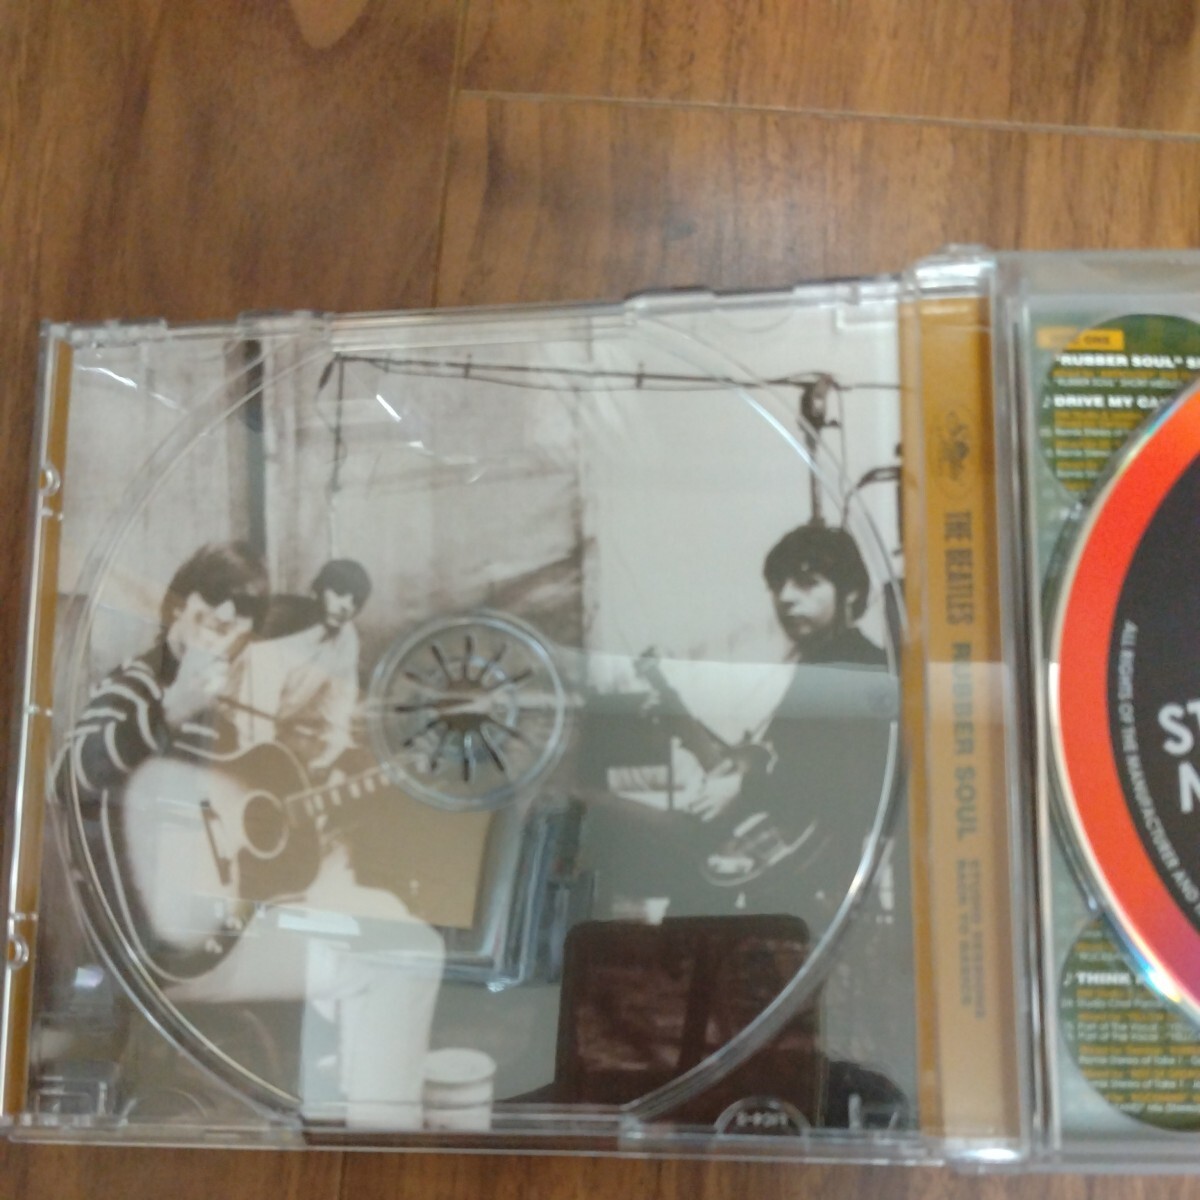 THE BEATLES / RUBBER SOUL STUDIO SESSIONS BACK TO BASICS （4CD）SMILN' EARS SECD-007A/B/C/D_画像9